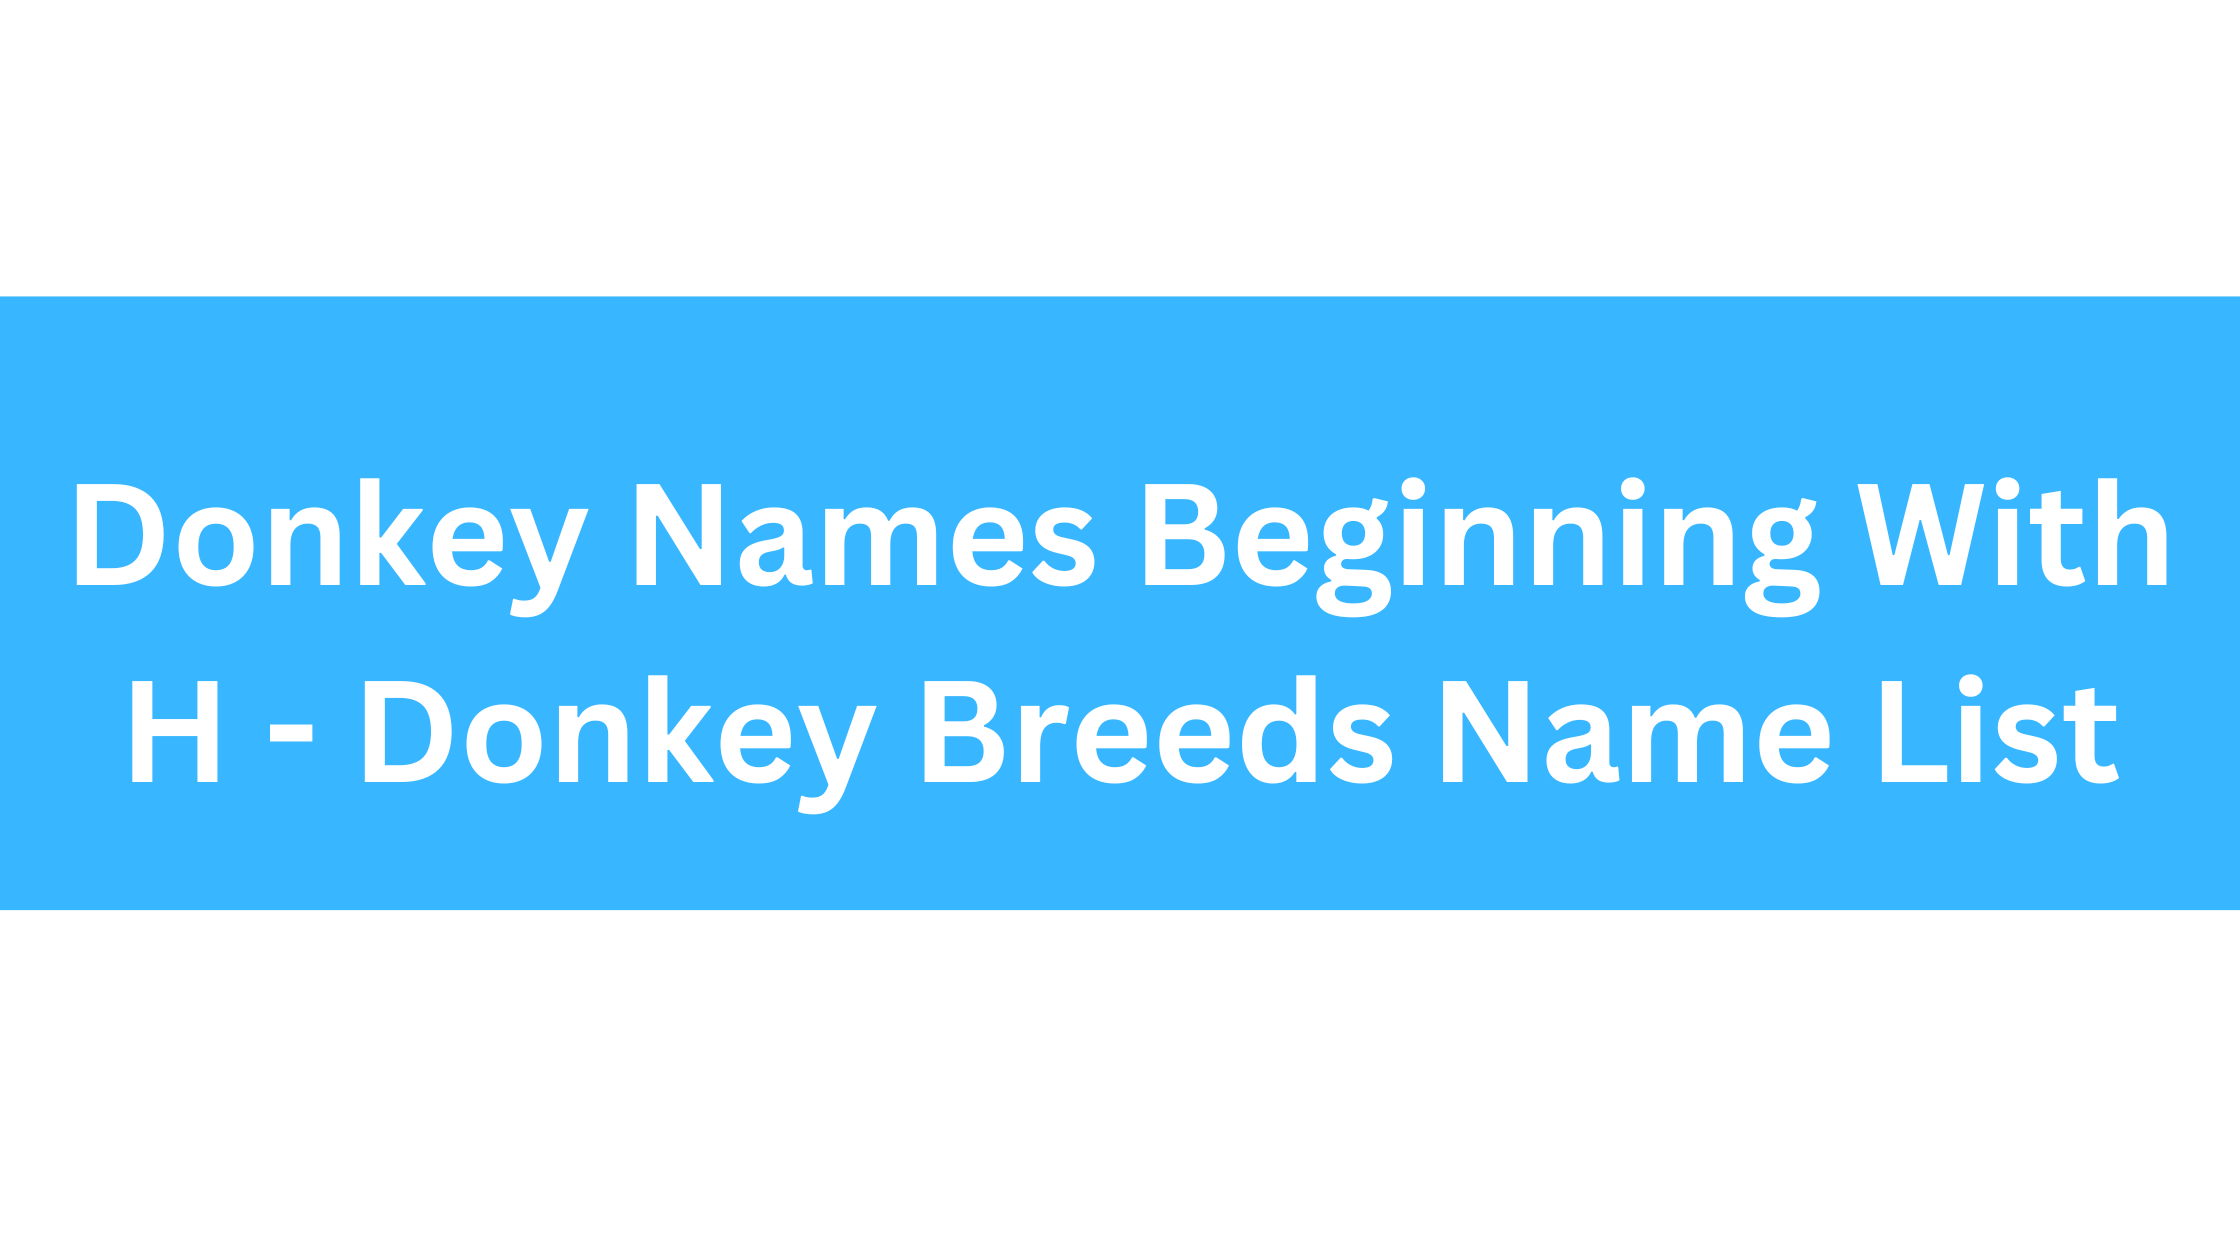 Donkey Names Beginning With H